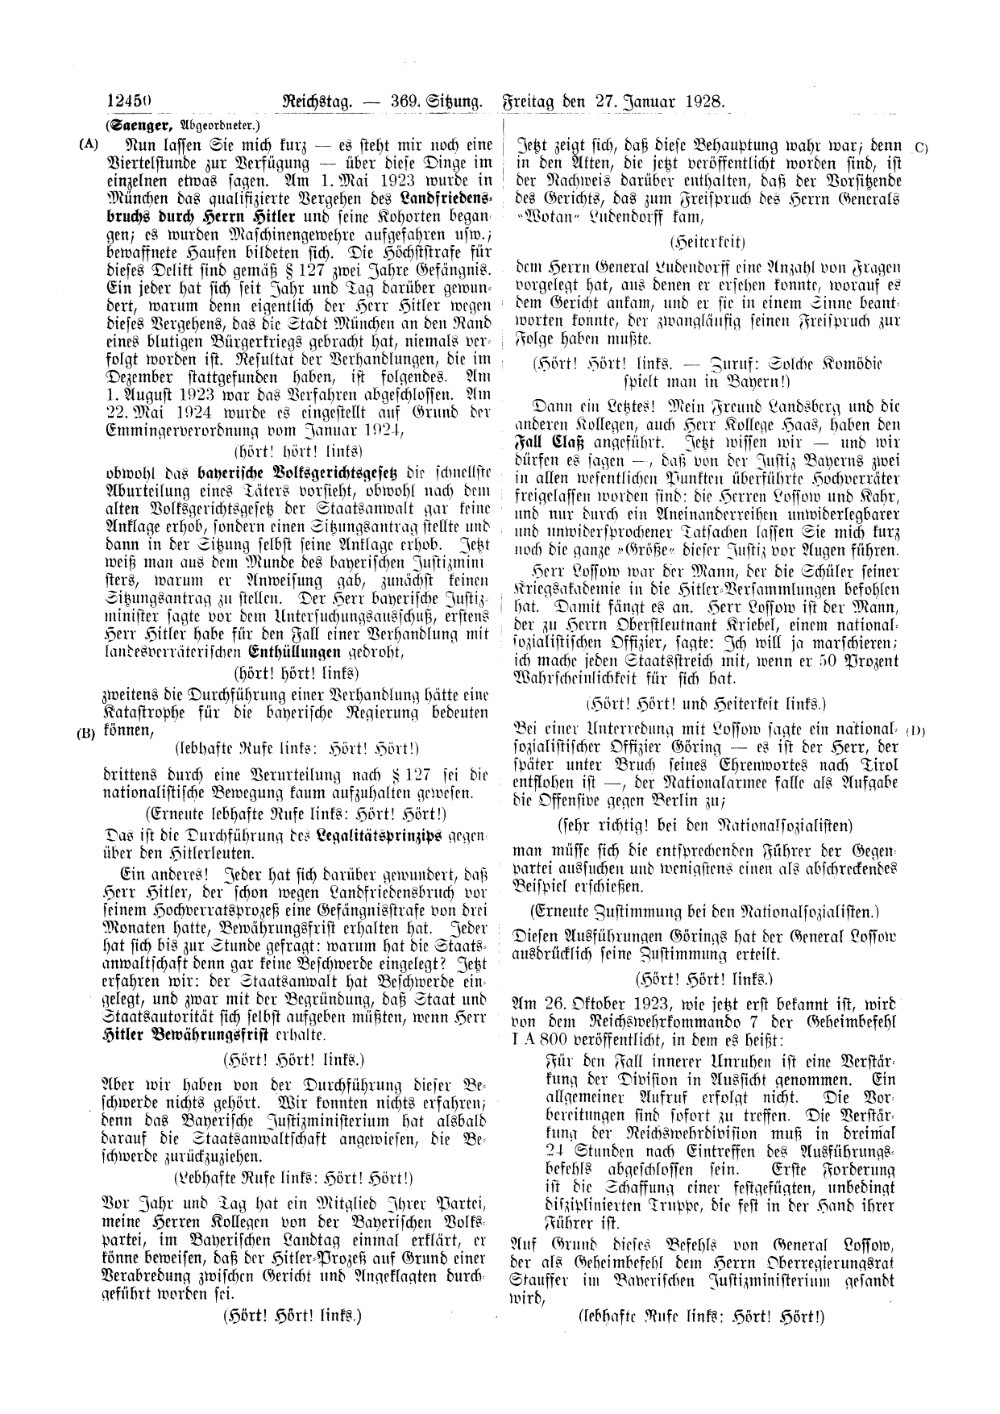 Scan of page 12450